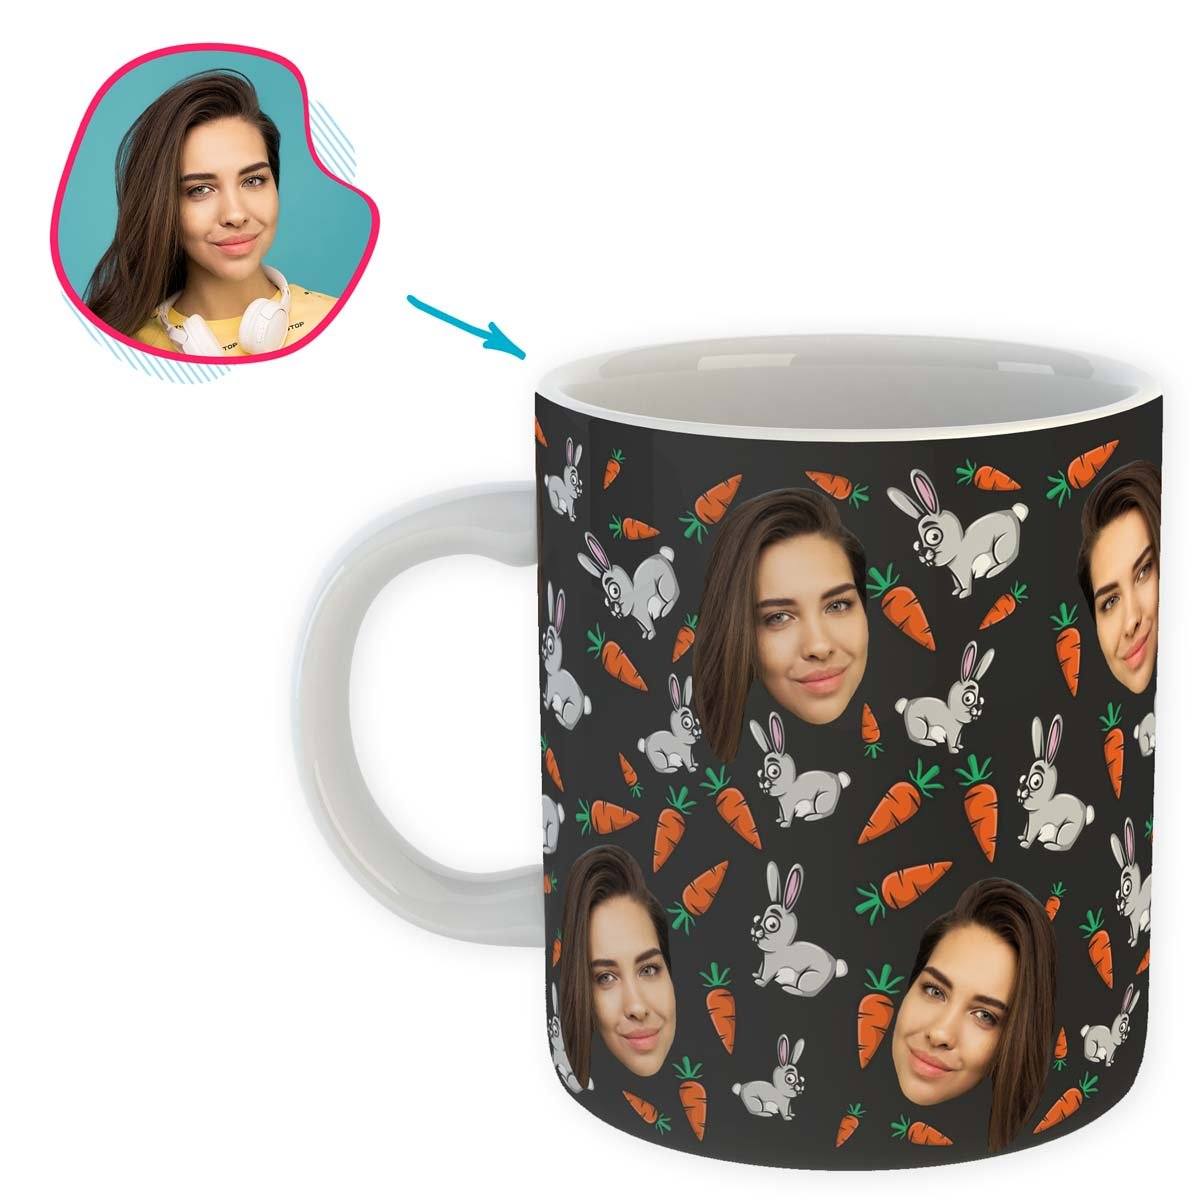 dark Bunny mug personalized with photo of face printed on it